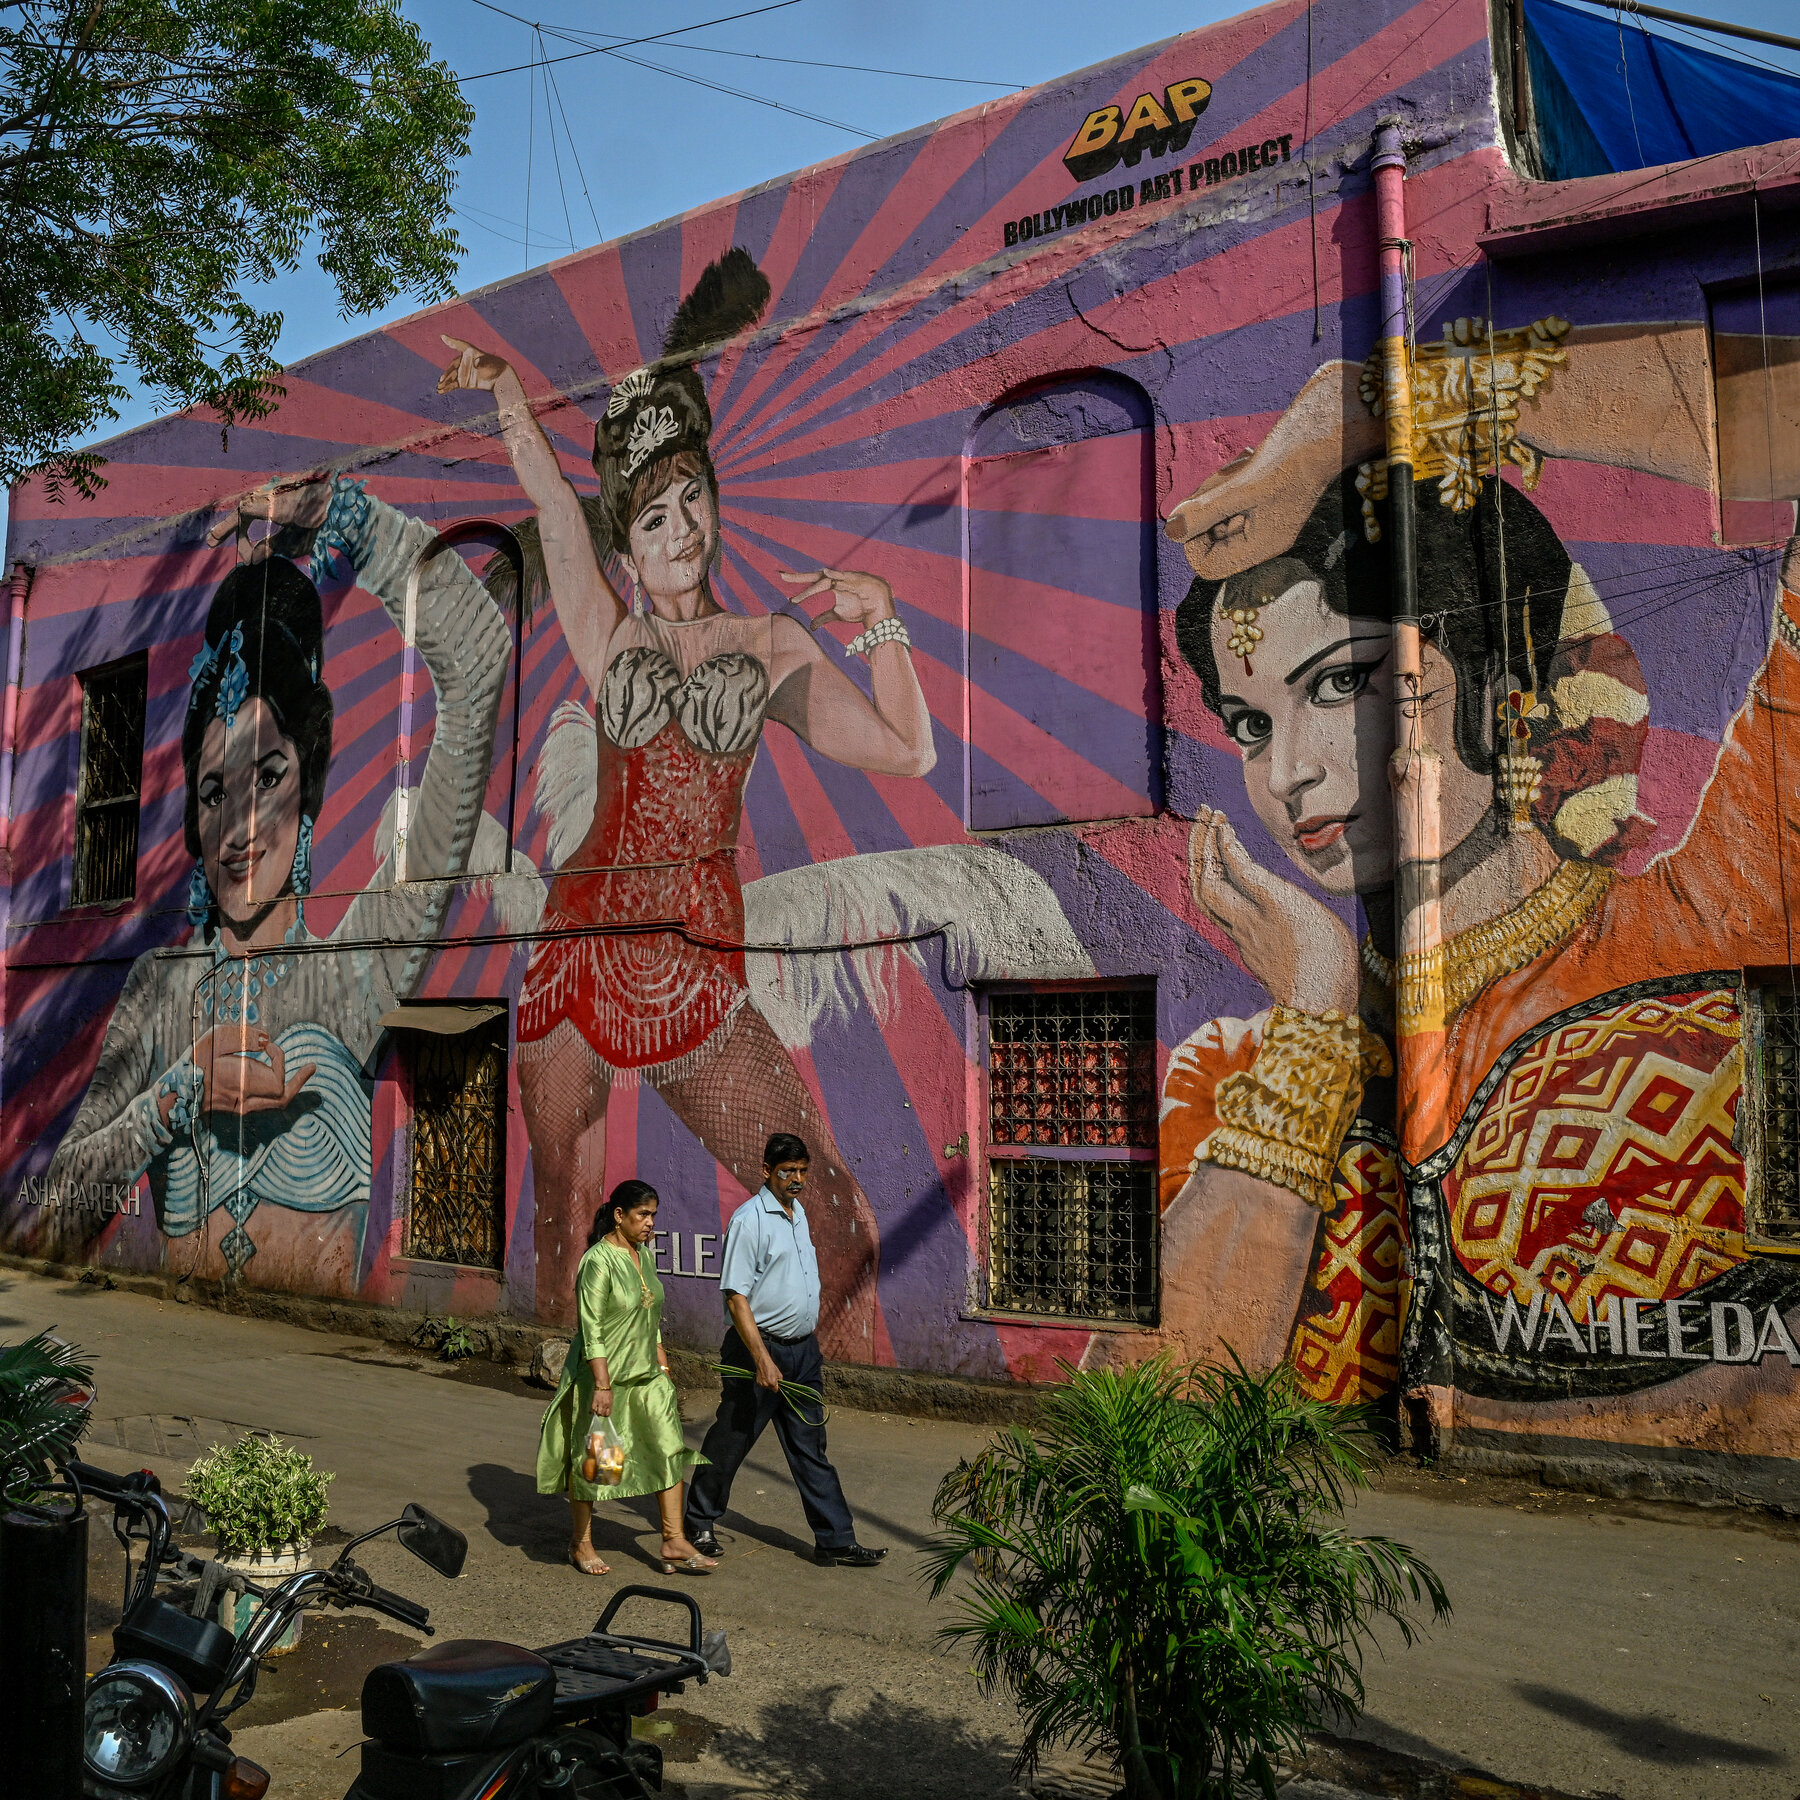 Two people walk past a vibrant street mural of three dancing women dressed in ornate Indian dress.